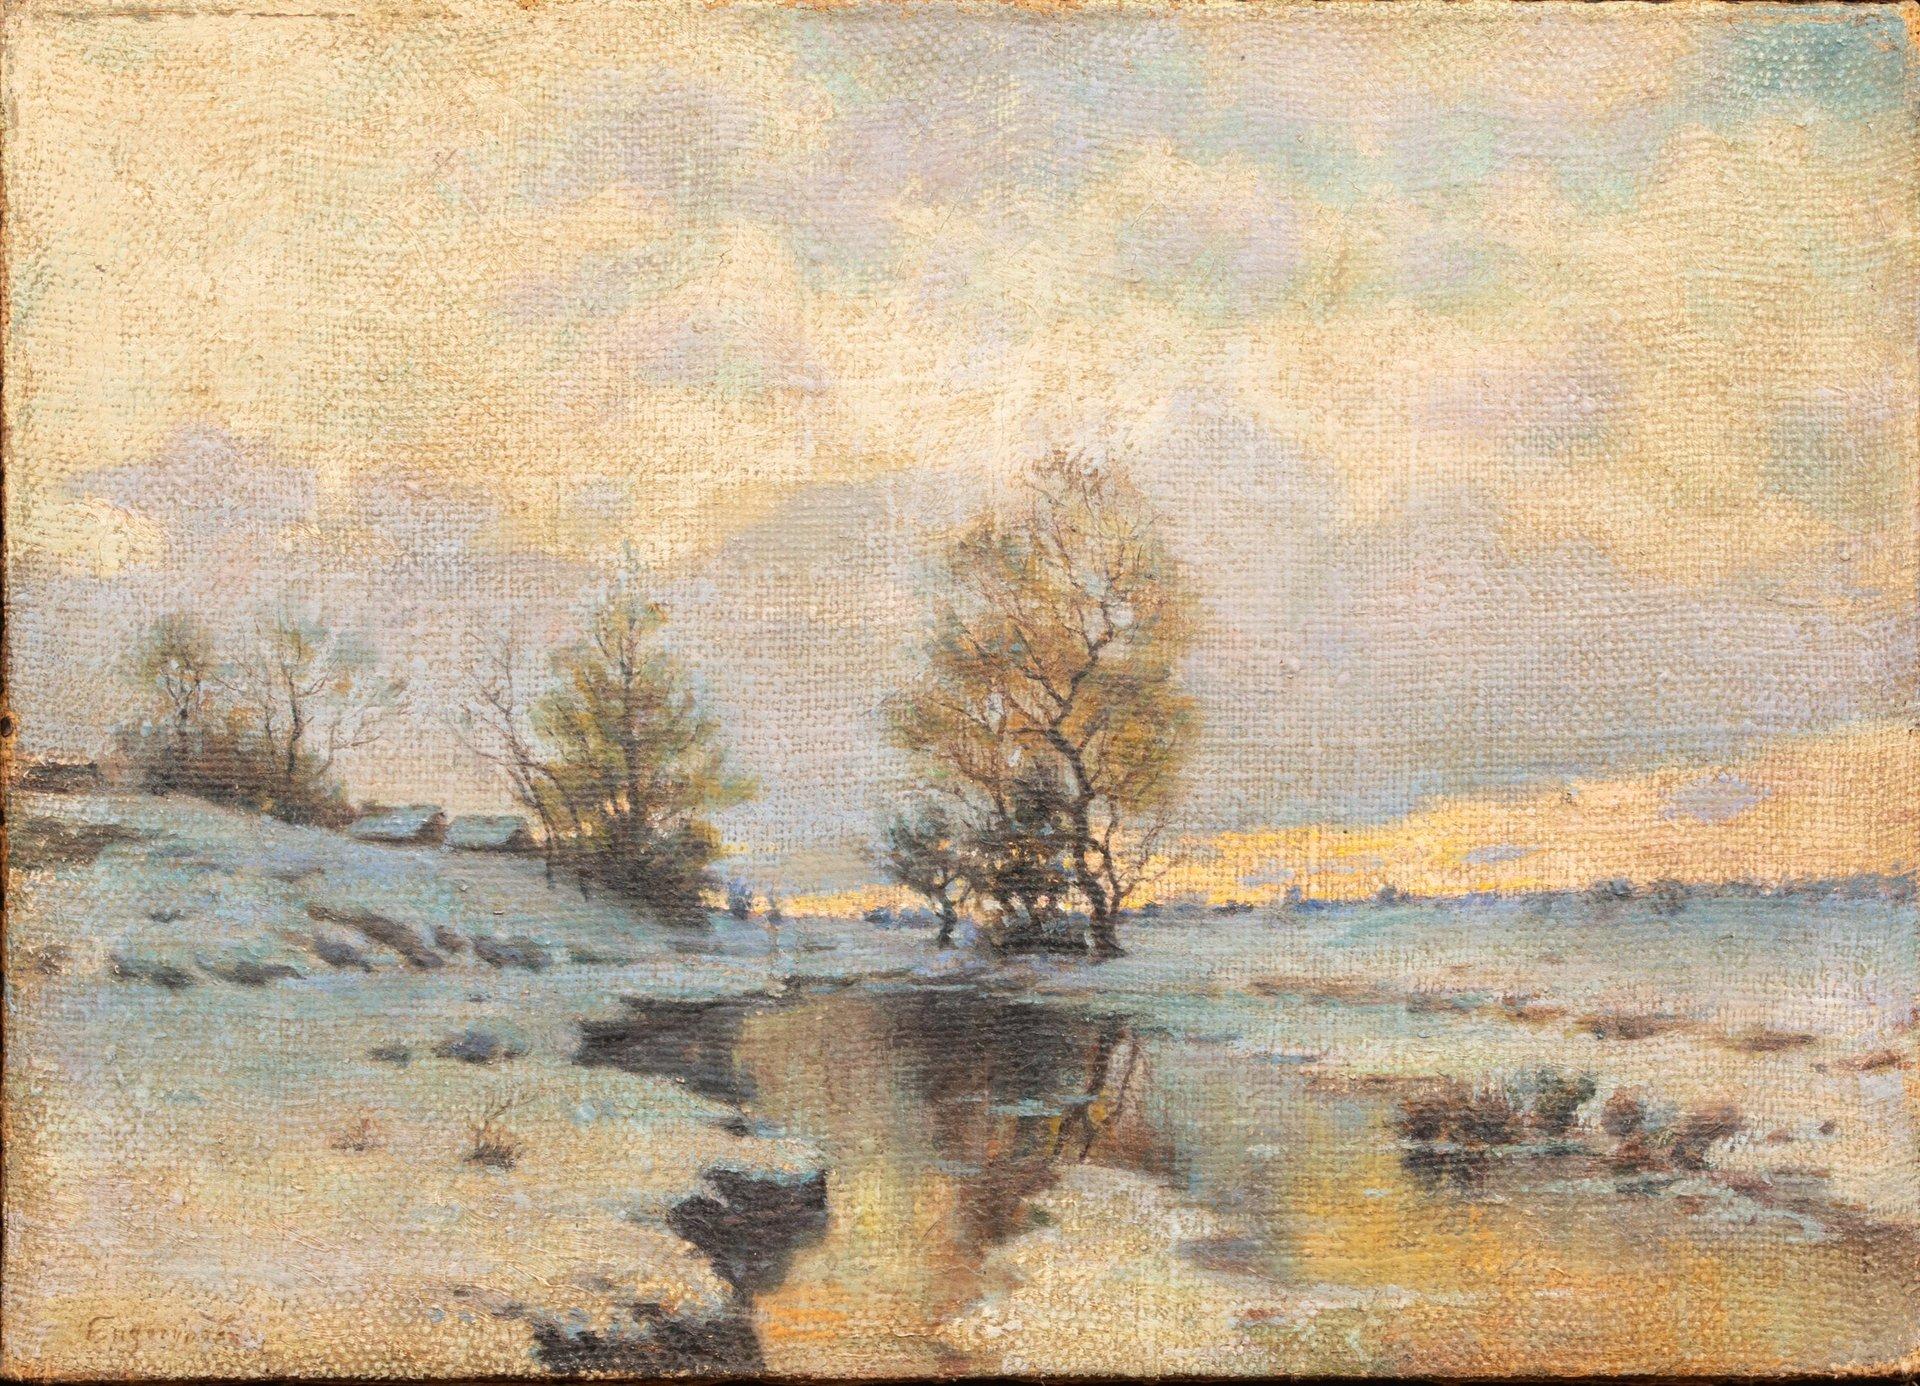 Early spring (Sketch), oil on jute by Endogurov Ivan Ivanovich (1861-1898) For Sale 5